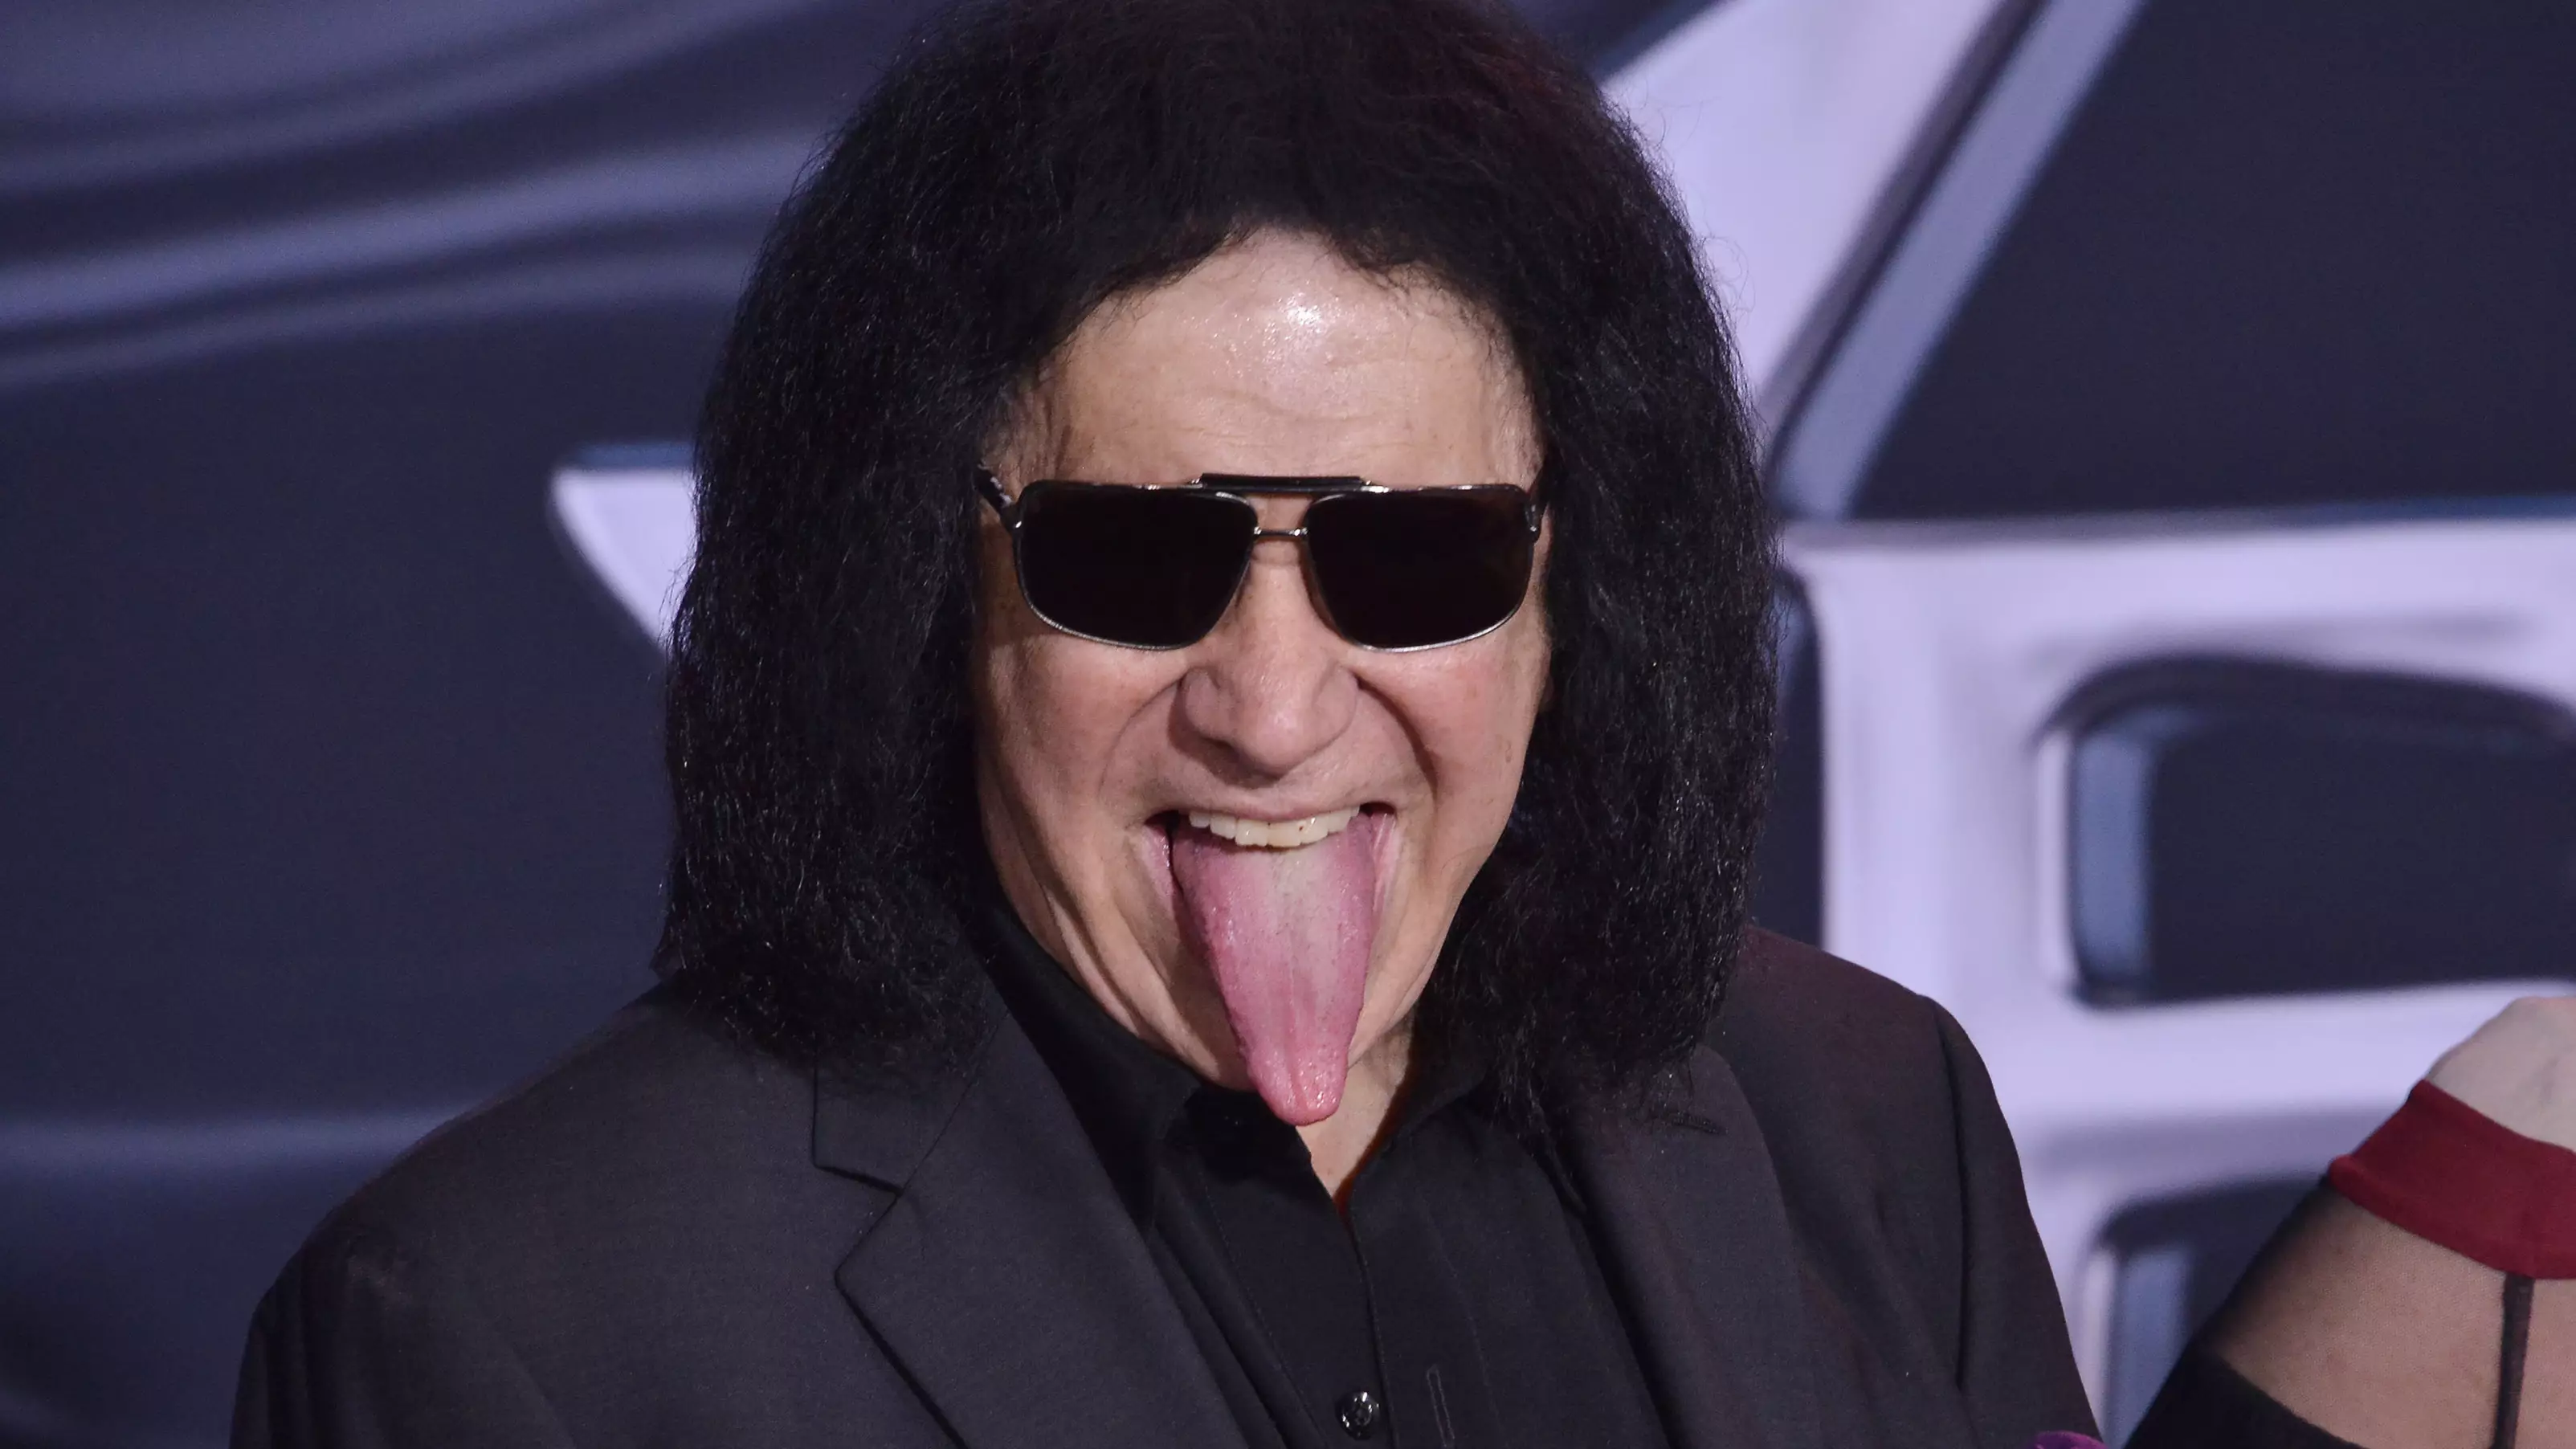 Kiss Frontman Gene Simmons Puts Ice In His Cereal To Keep The Milk Cold